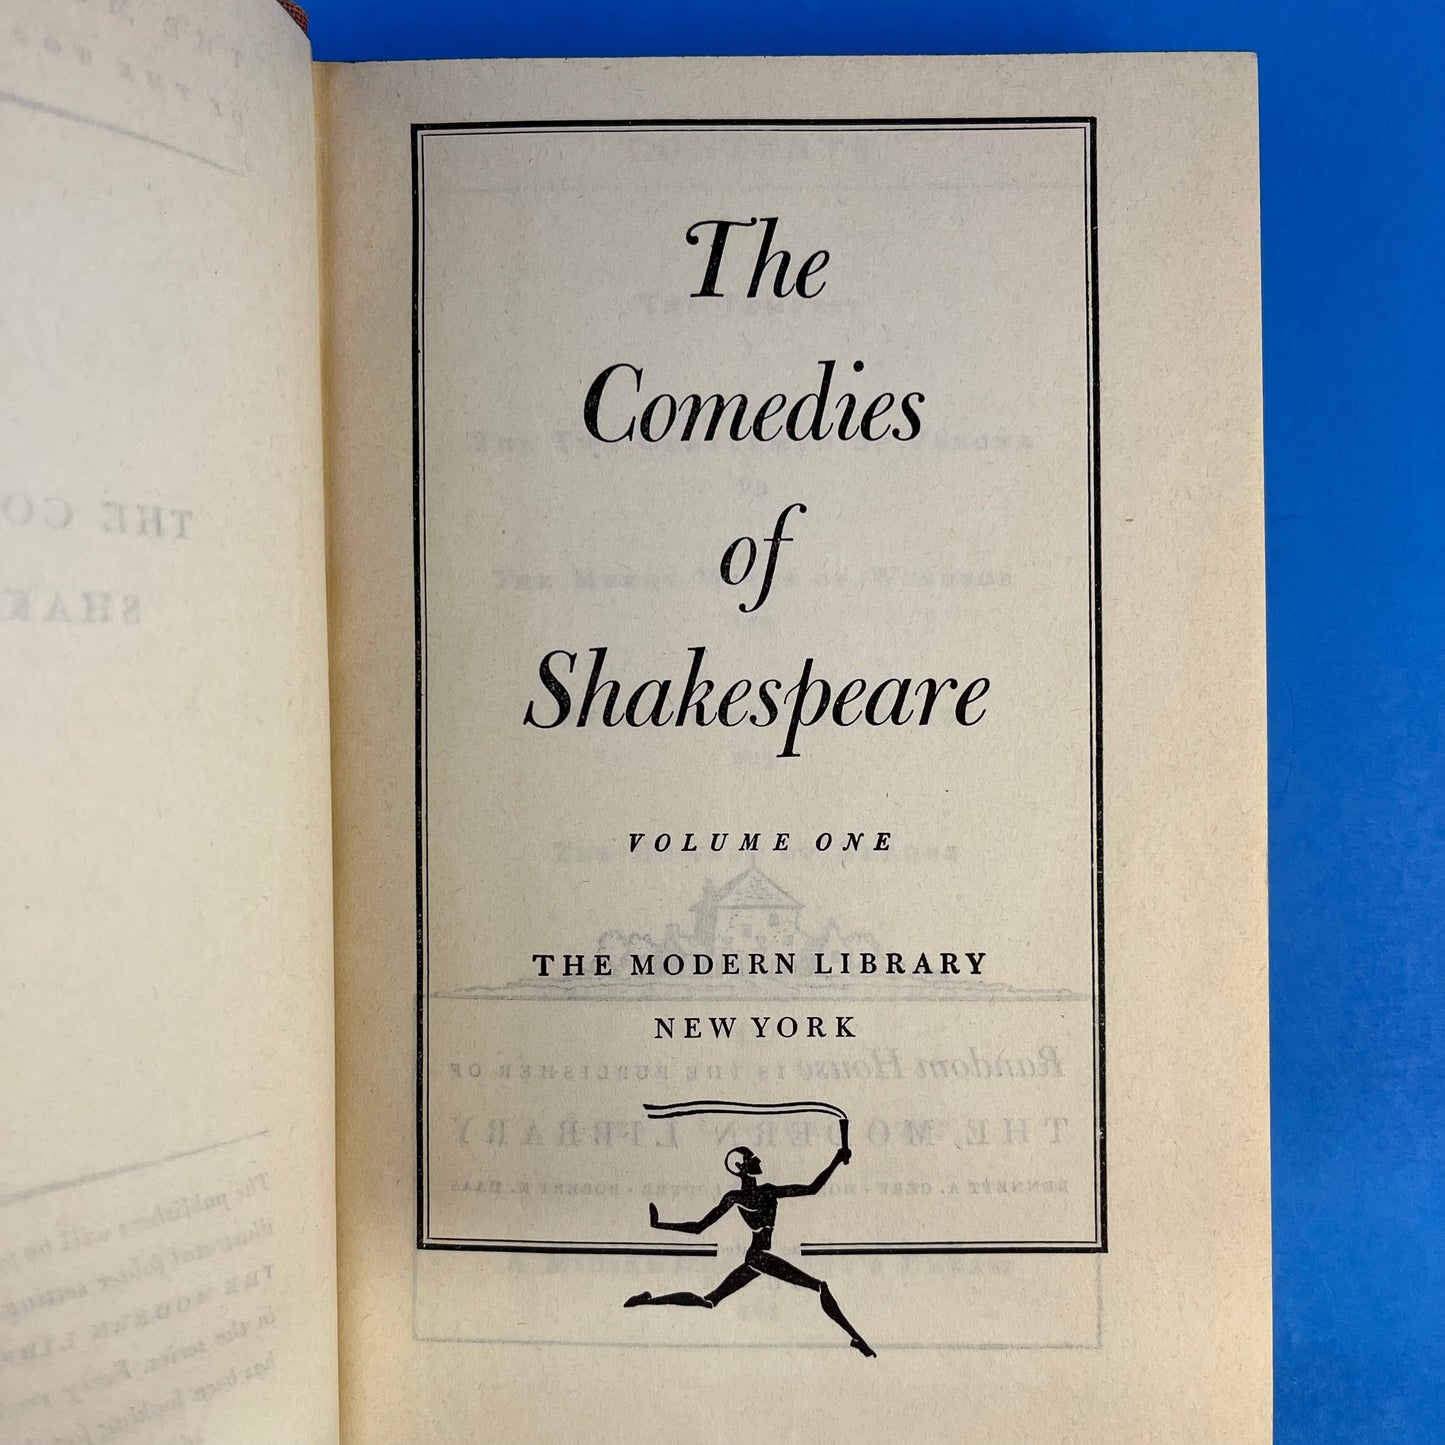 The Tragedies & Comedies of Shakespeare (Set of 4)